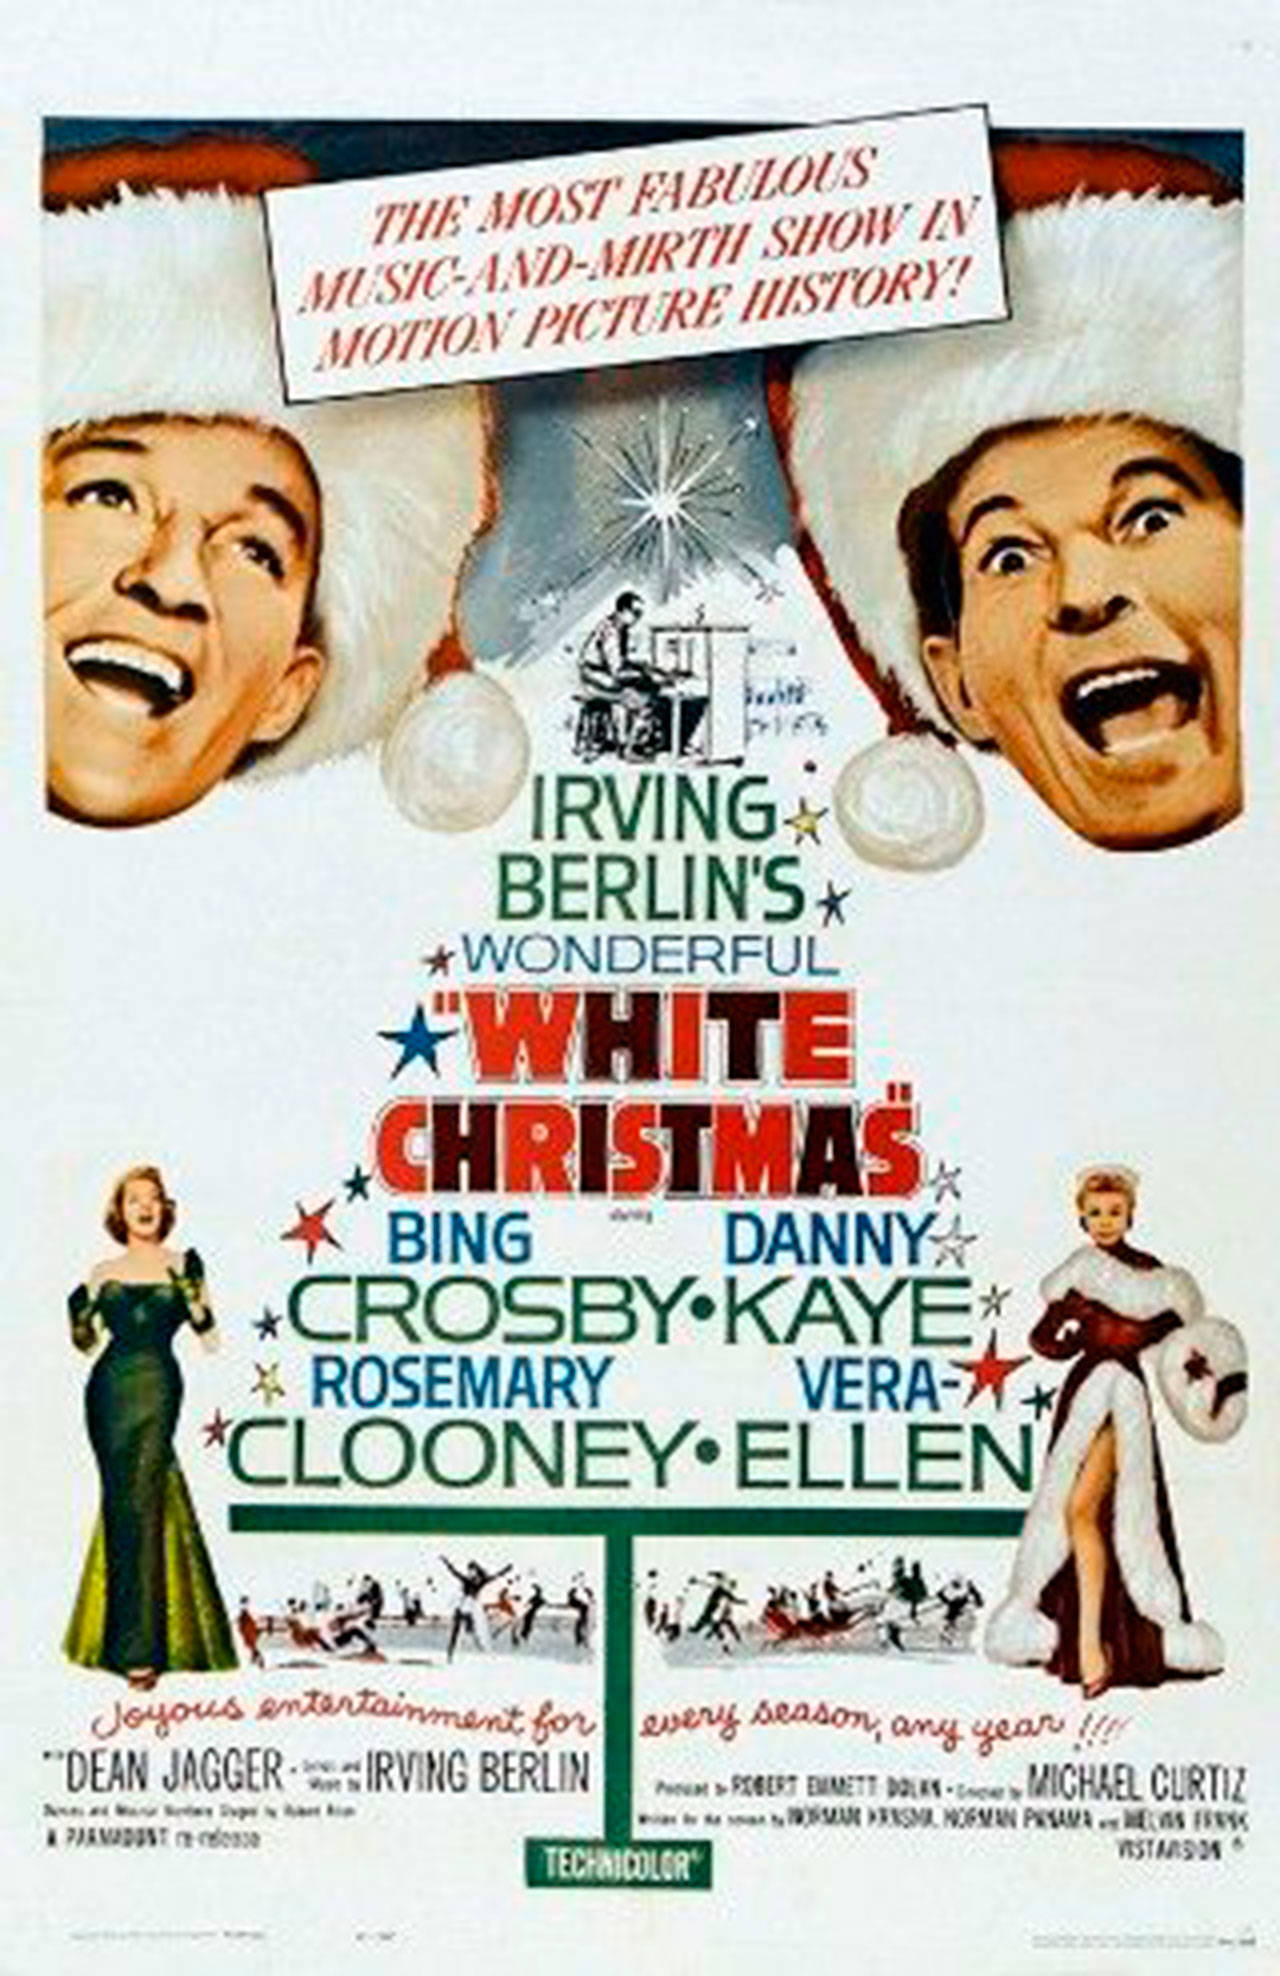 Image courtesy of Paramount Pictures | The 1954 holiday-themed romantic musical “White Christmas” will return to the big screen at 7 p.m. Wednesday, Dec. 12 at Bainbridge Cinemas.